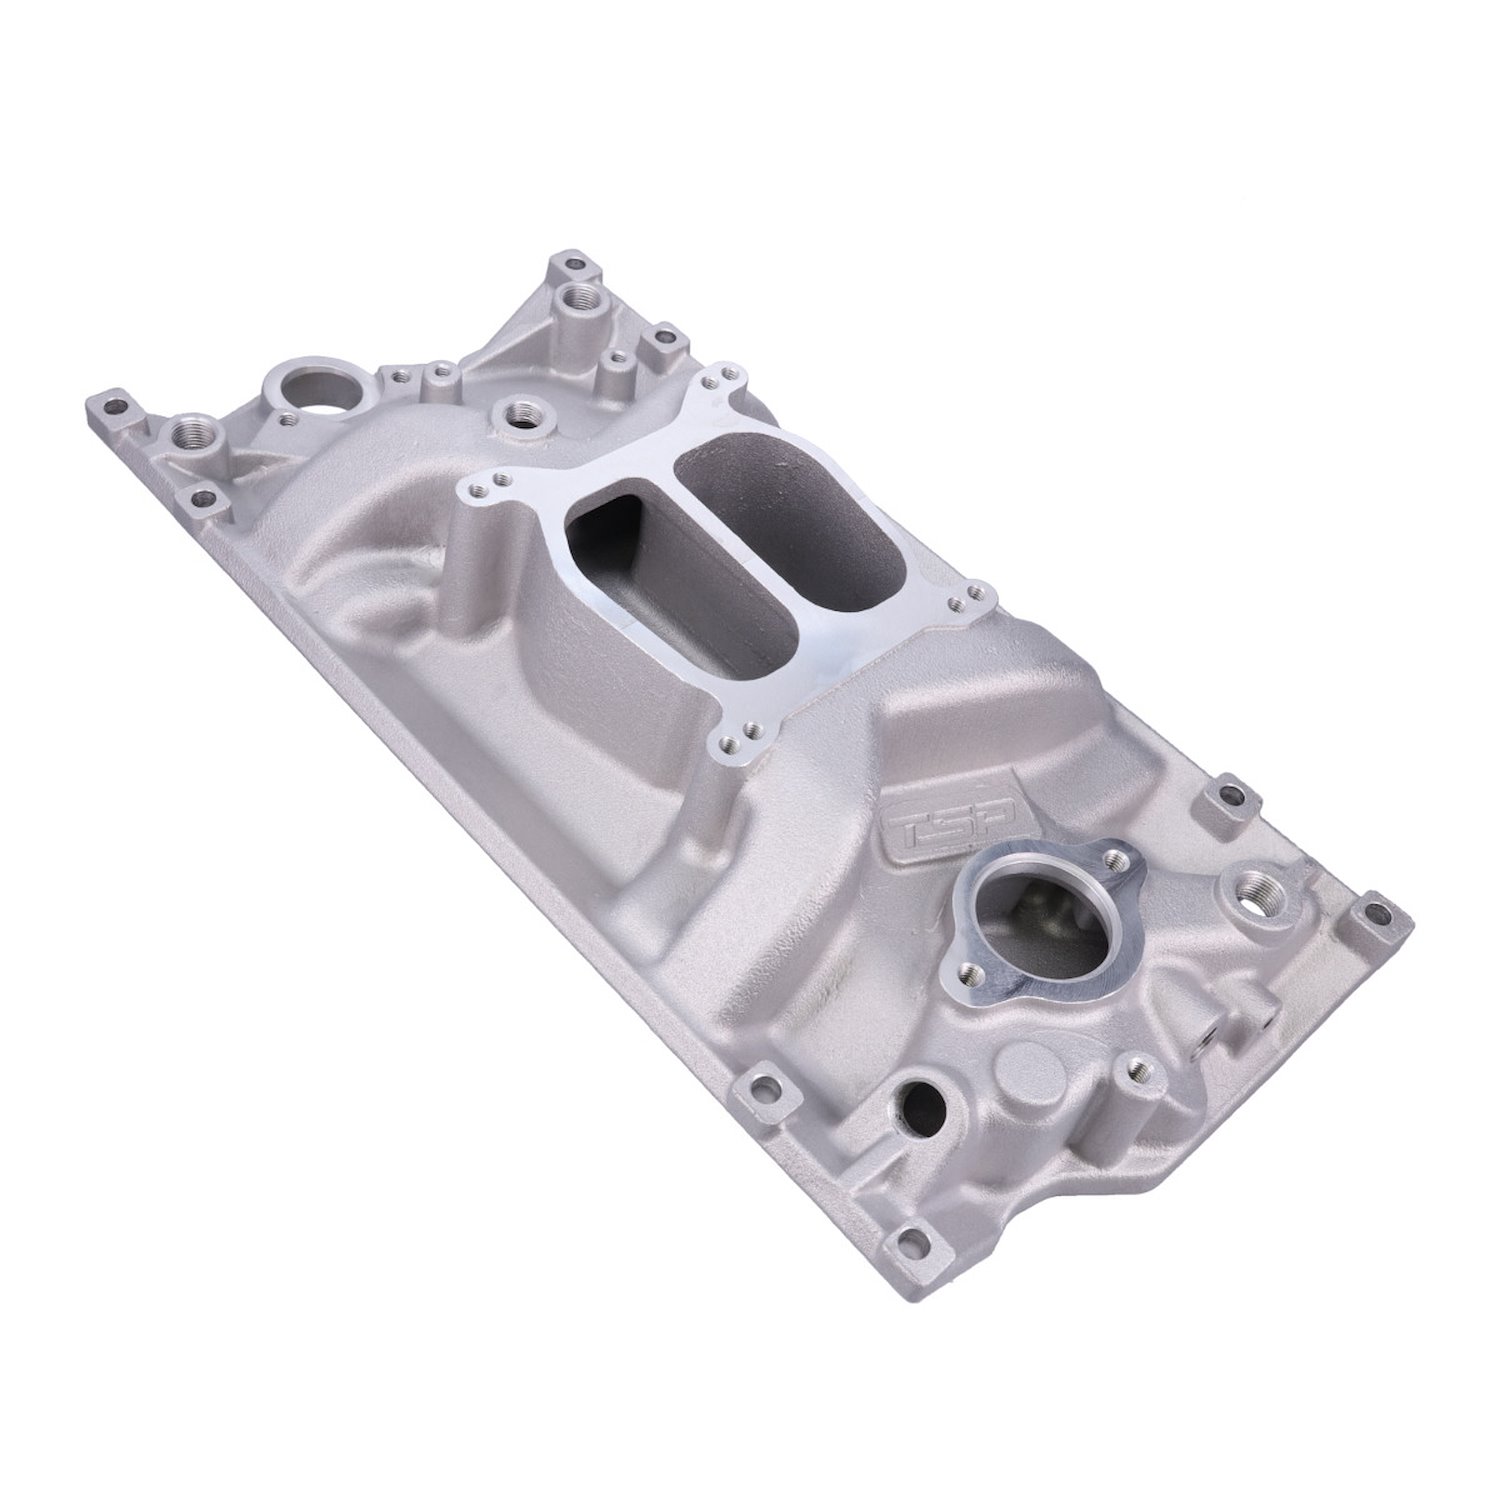 82007 Intake Manifold, Chevy Small Block Carb. Aluminum Dual Plane, Polished